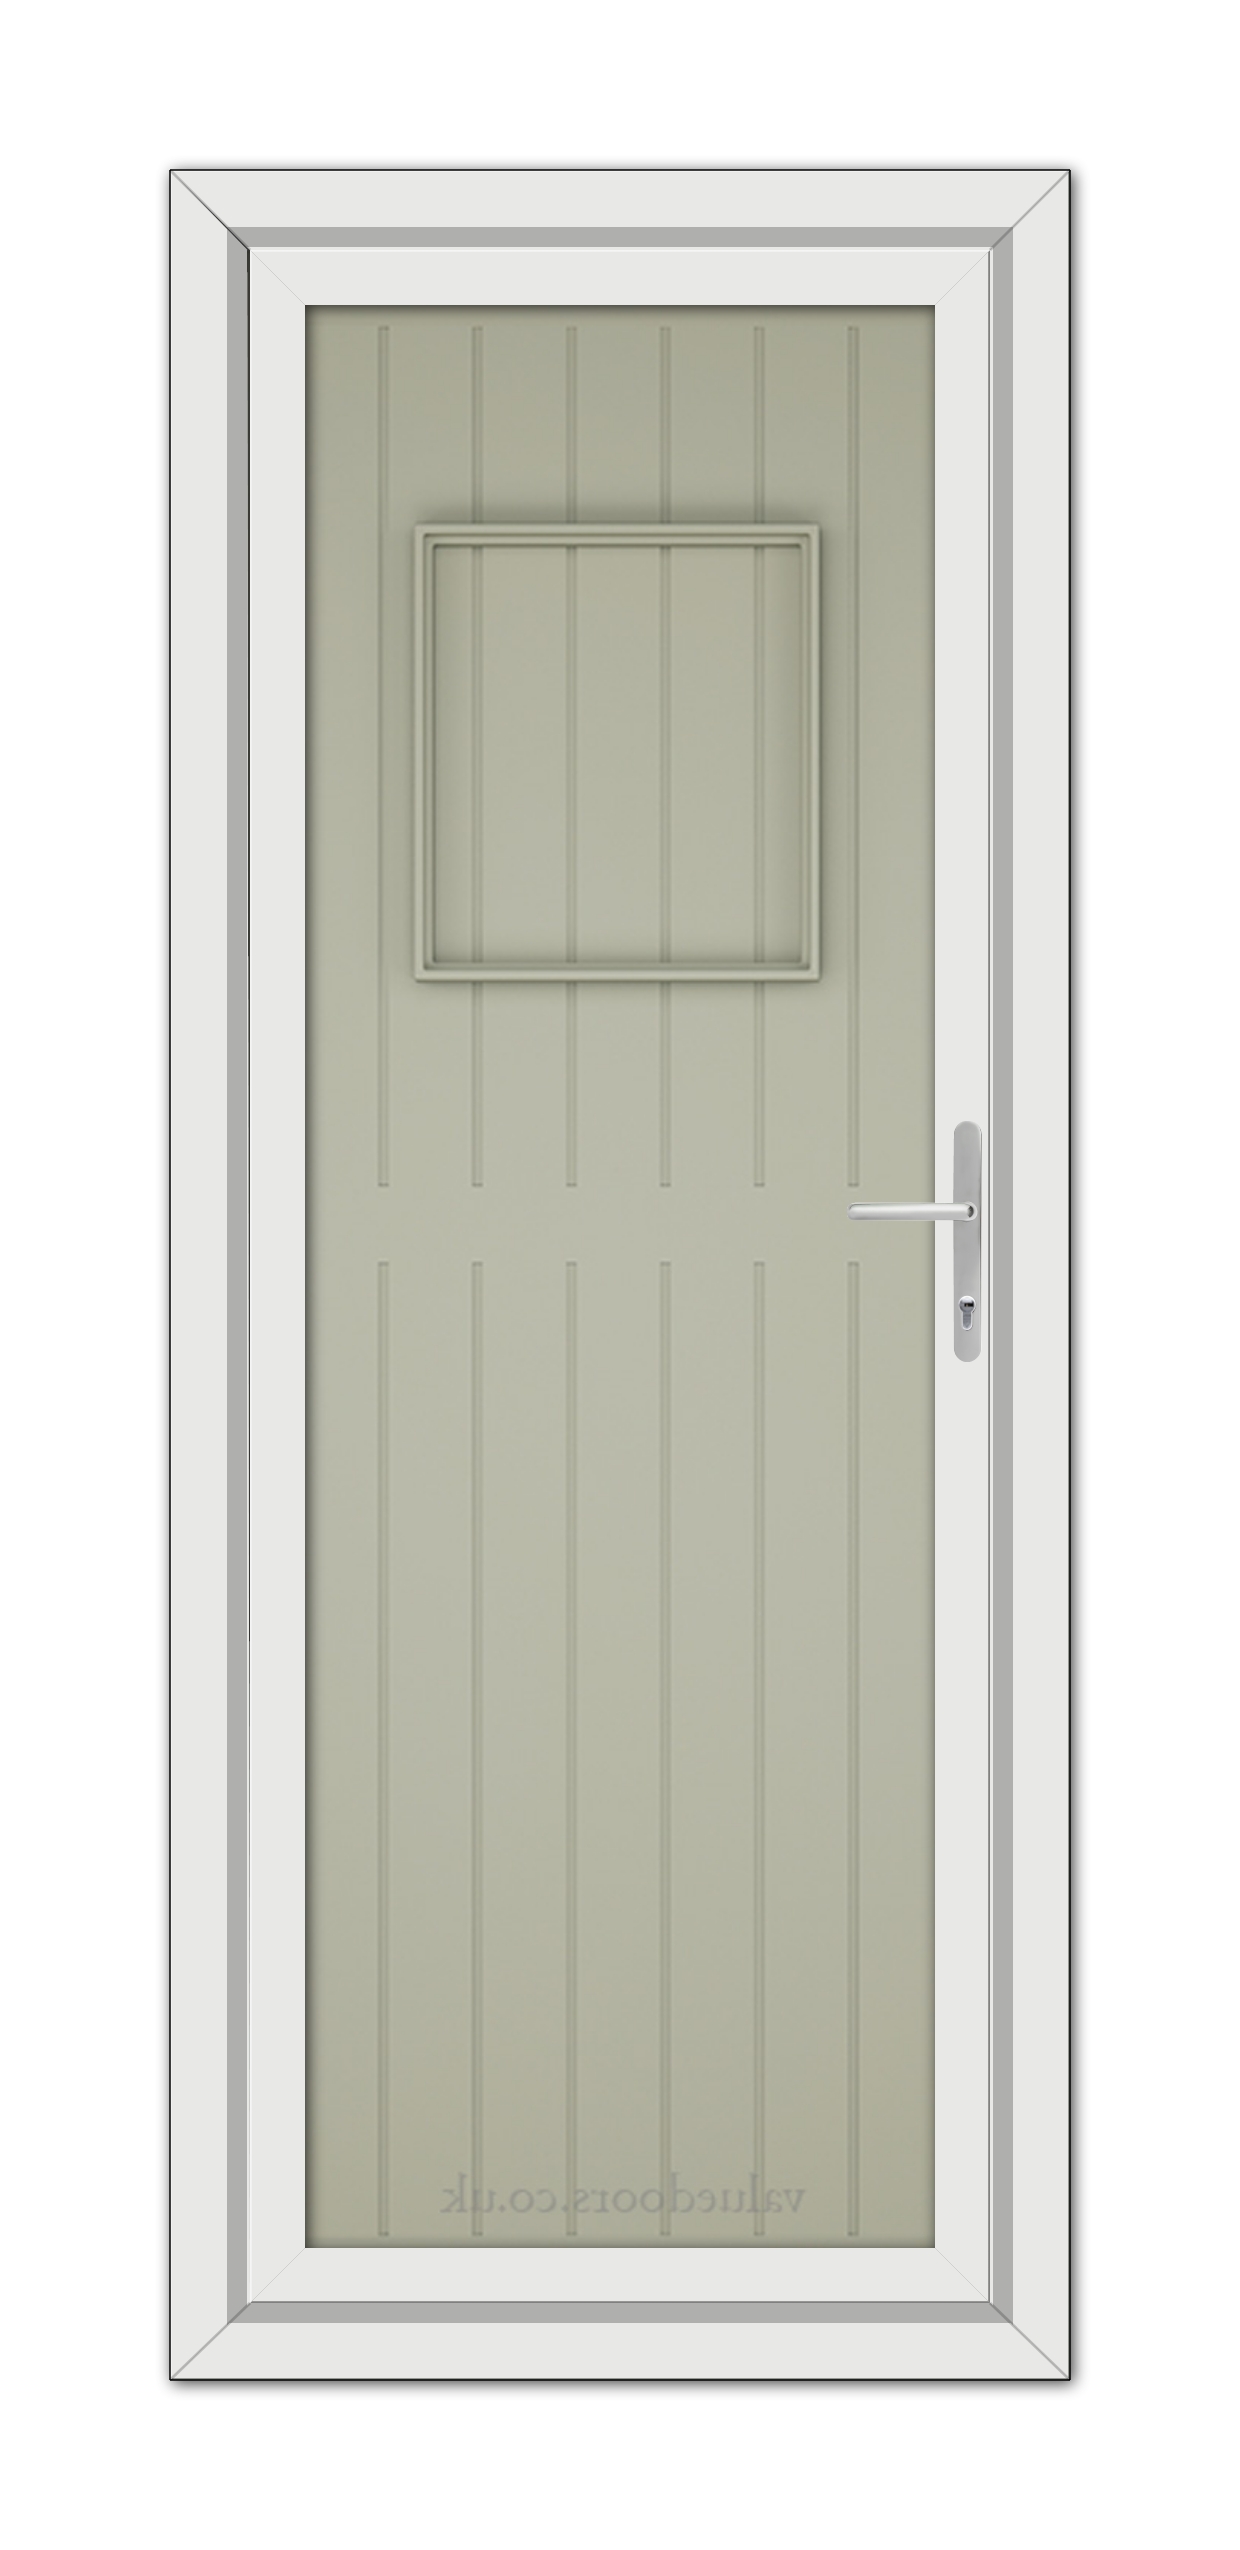 A modern Agate Grey Chatsworth Solid uPVC door with a small, rectangular window at the top and a metallic handle, set in a white door frame.